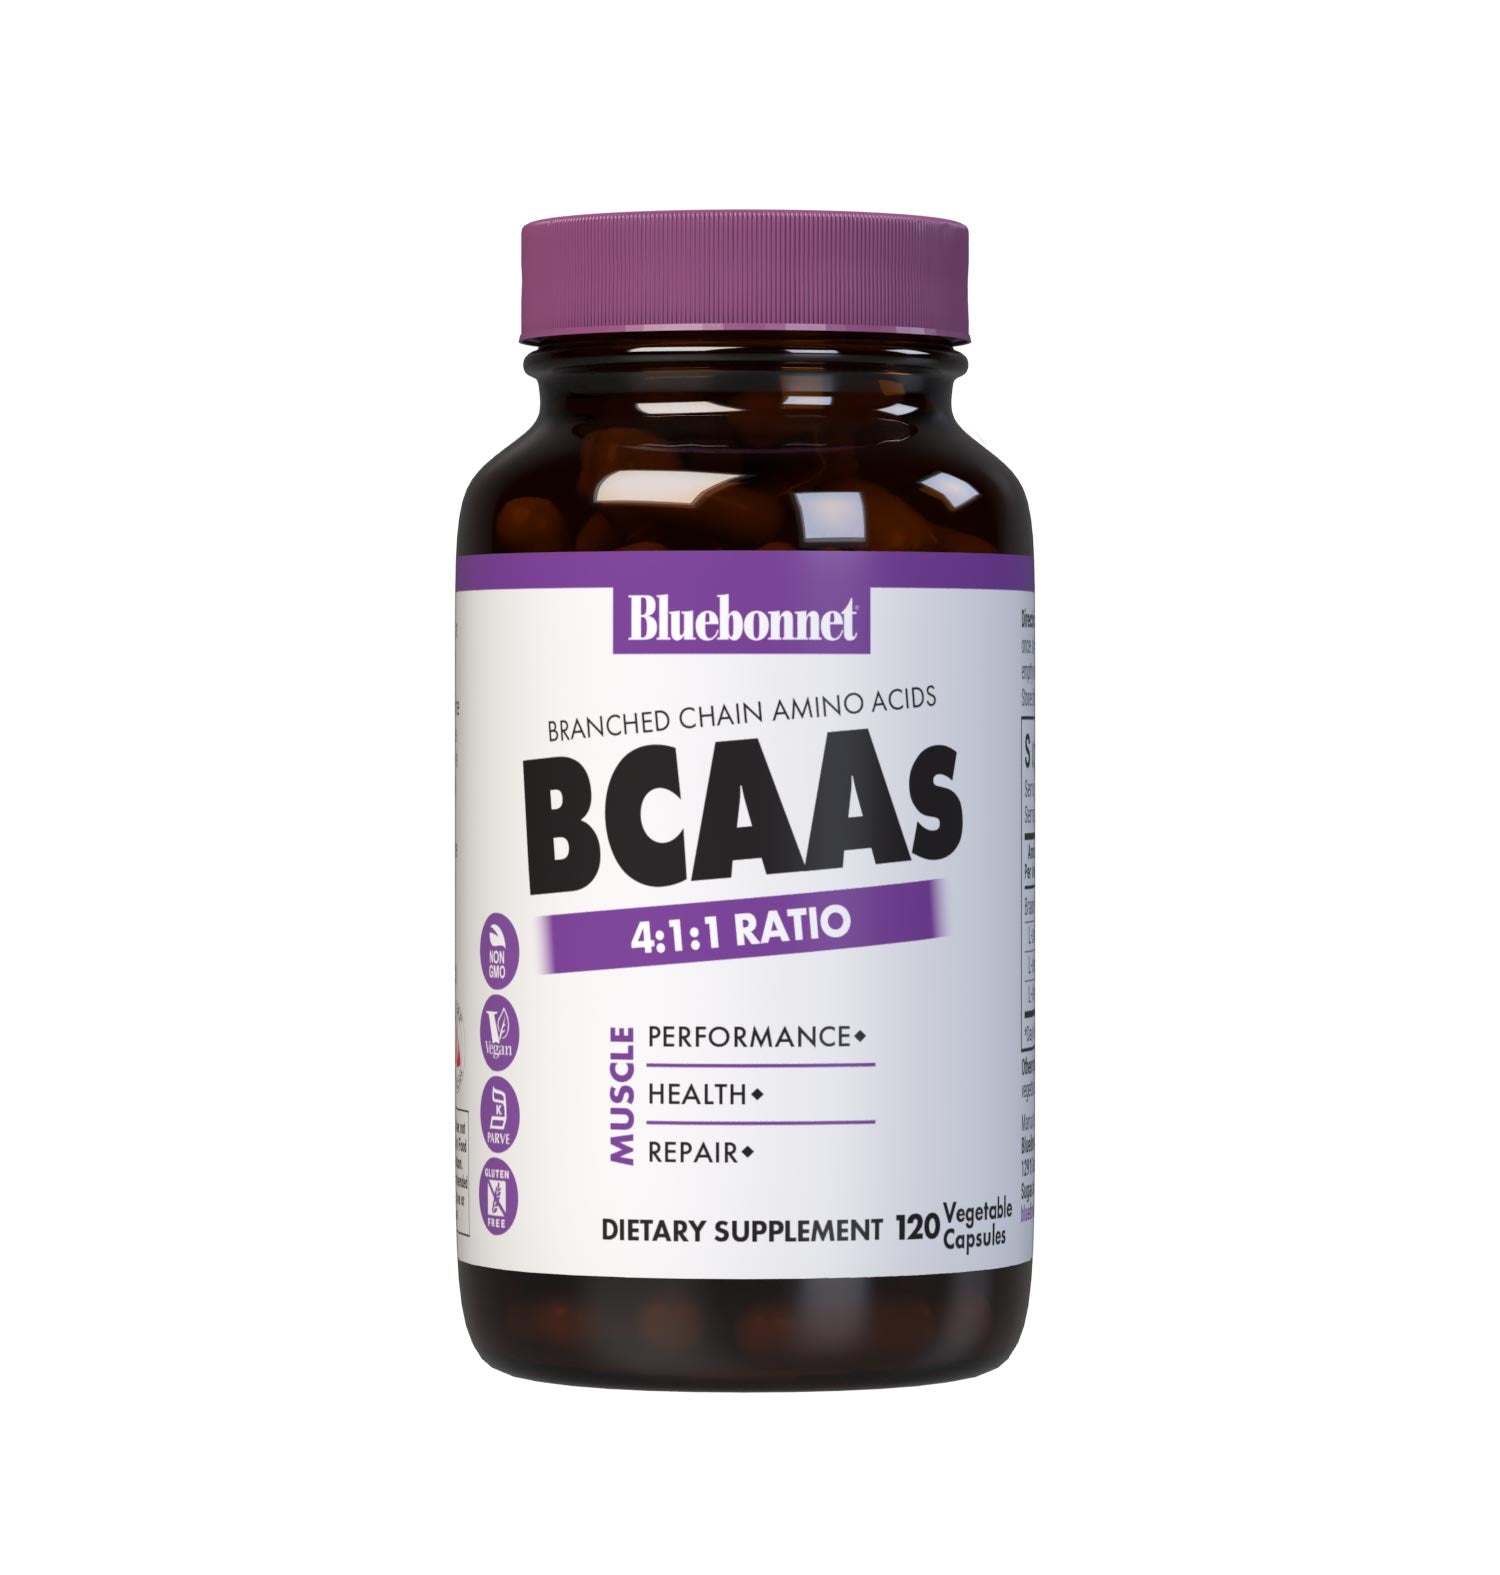 Bluebonnet’s BCAAs 120 Vegetable Capsules are formulated with free-form, anabolic amino acids (L-leucine, L-isoleucine and L-valine) from Ajinomoto, the world-class quality leader in the production and purity of amino acids. These vegetarian-sourced BCAAs are provided in the scientifically supported 4:1:1 ratio for peak muscle performance, health and repair. #size_120 count